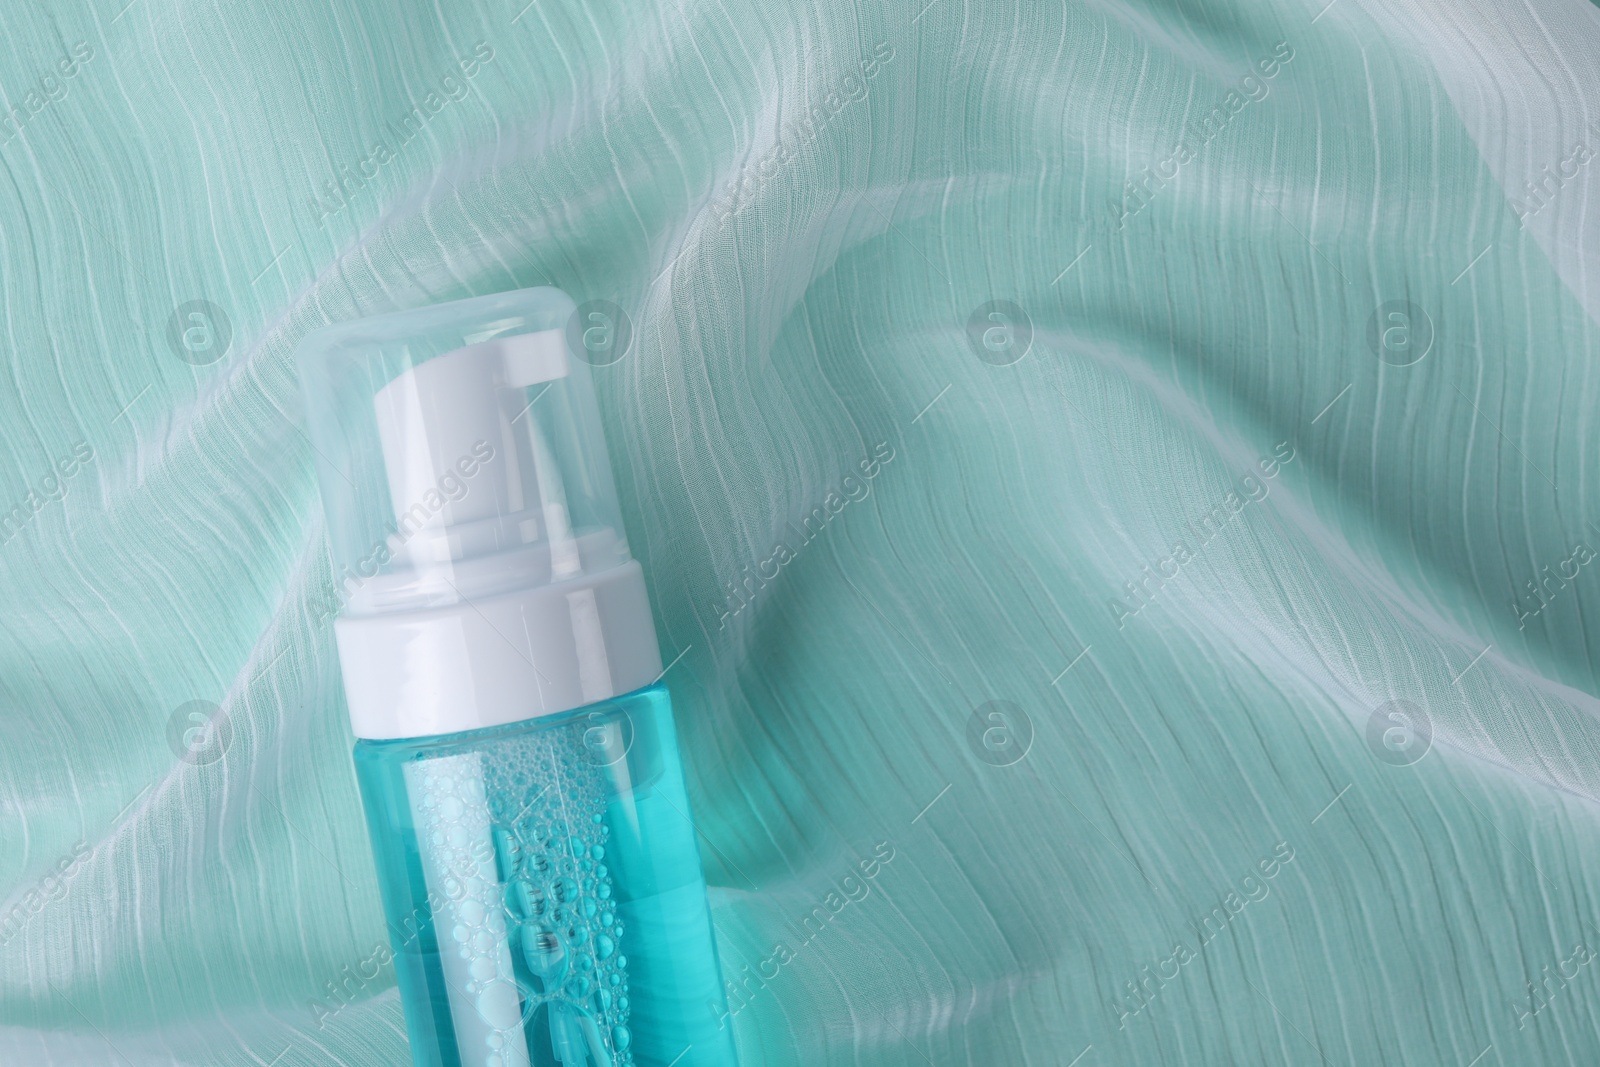 Photo of Bottle of face cleansing product on turquoise fabric, top view. Space for text